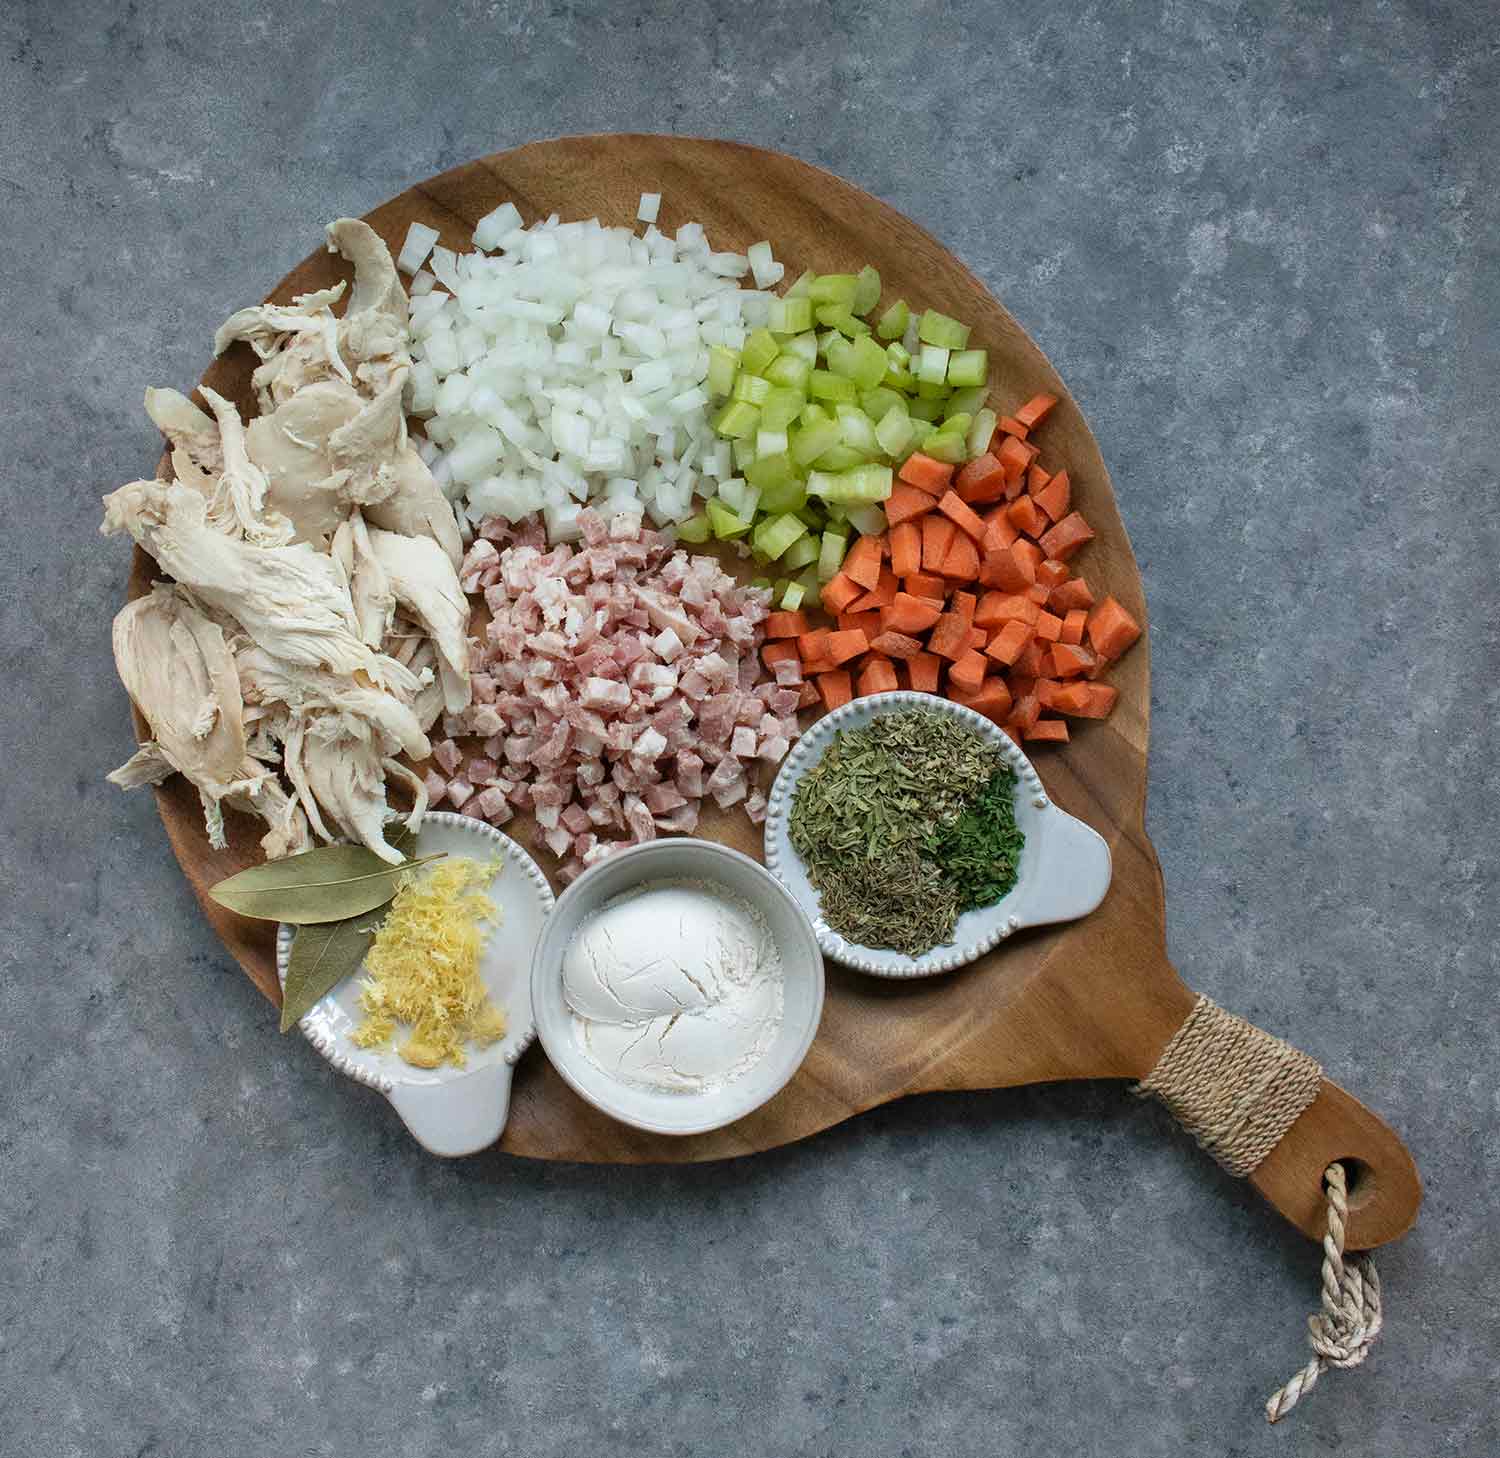 Ingredients for Creamy Chicken Noodle Soup arranged on a wooden serving board.